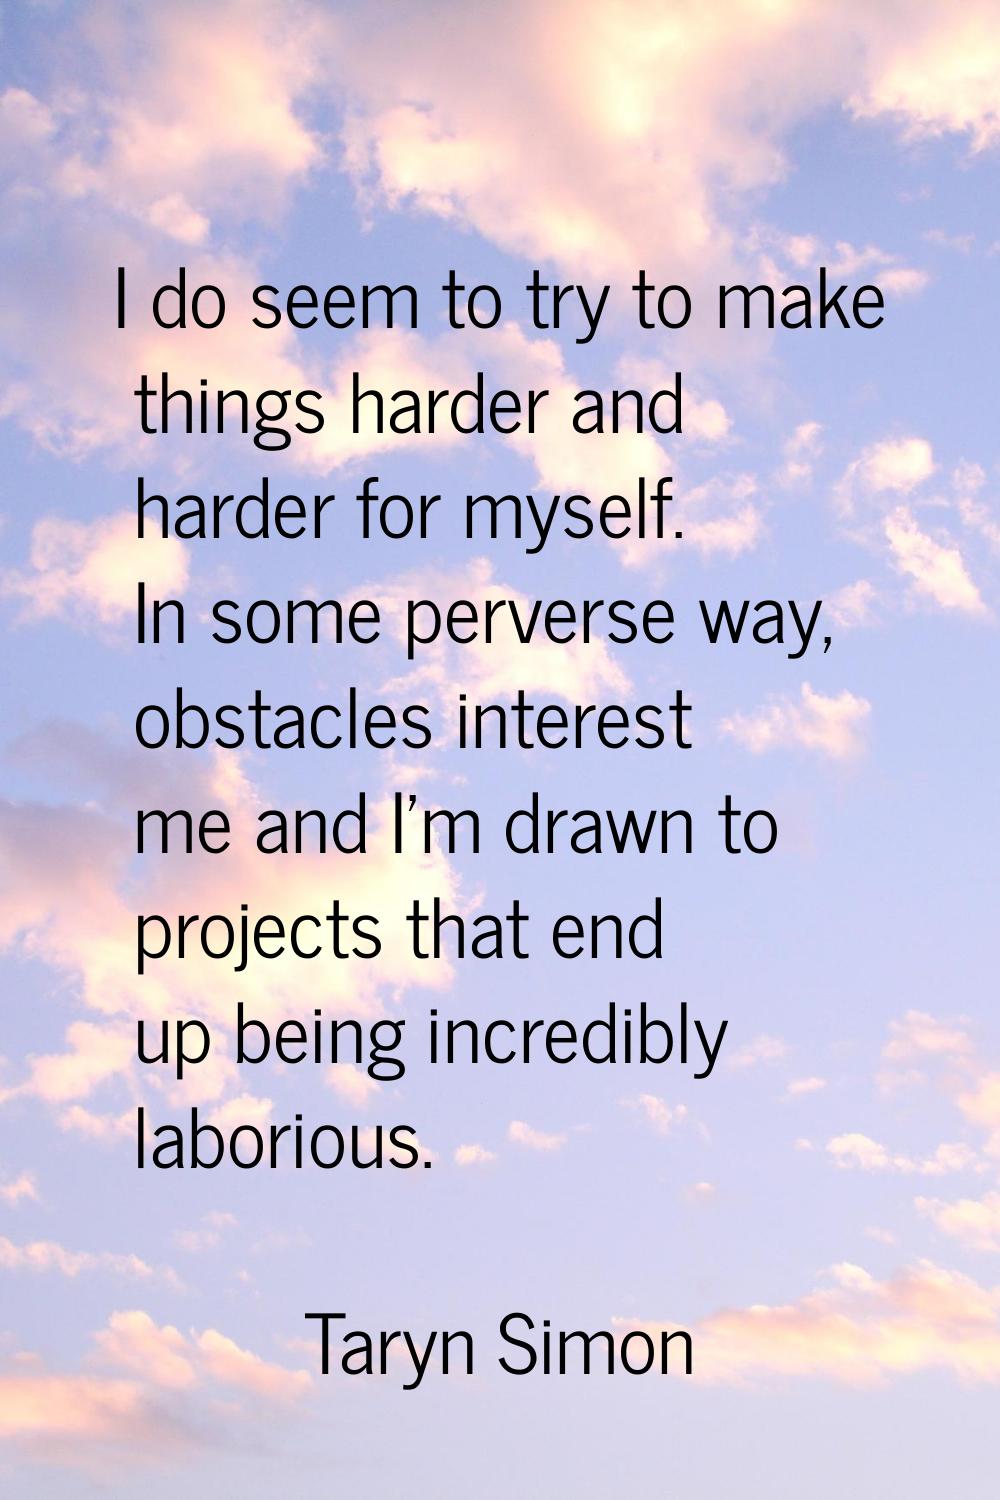 I do seem to try to make things harder and harder for myself. In some perverse way, obstacles inter